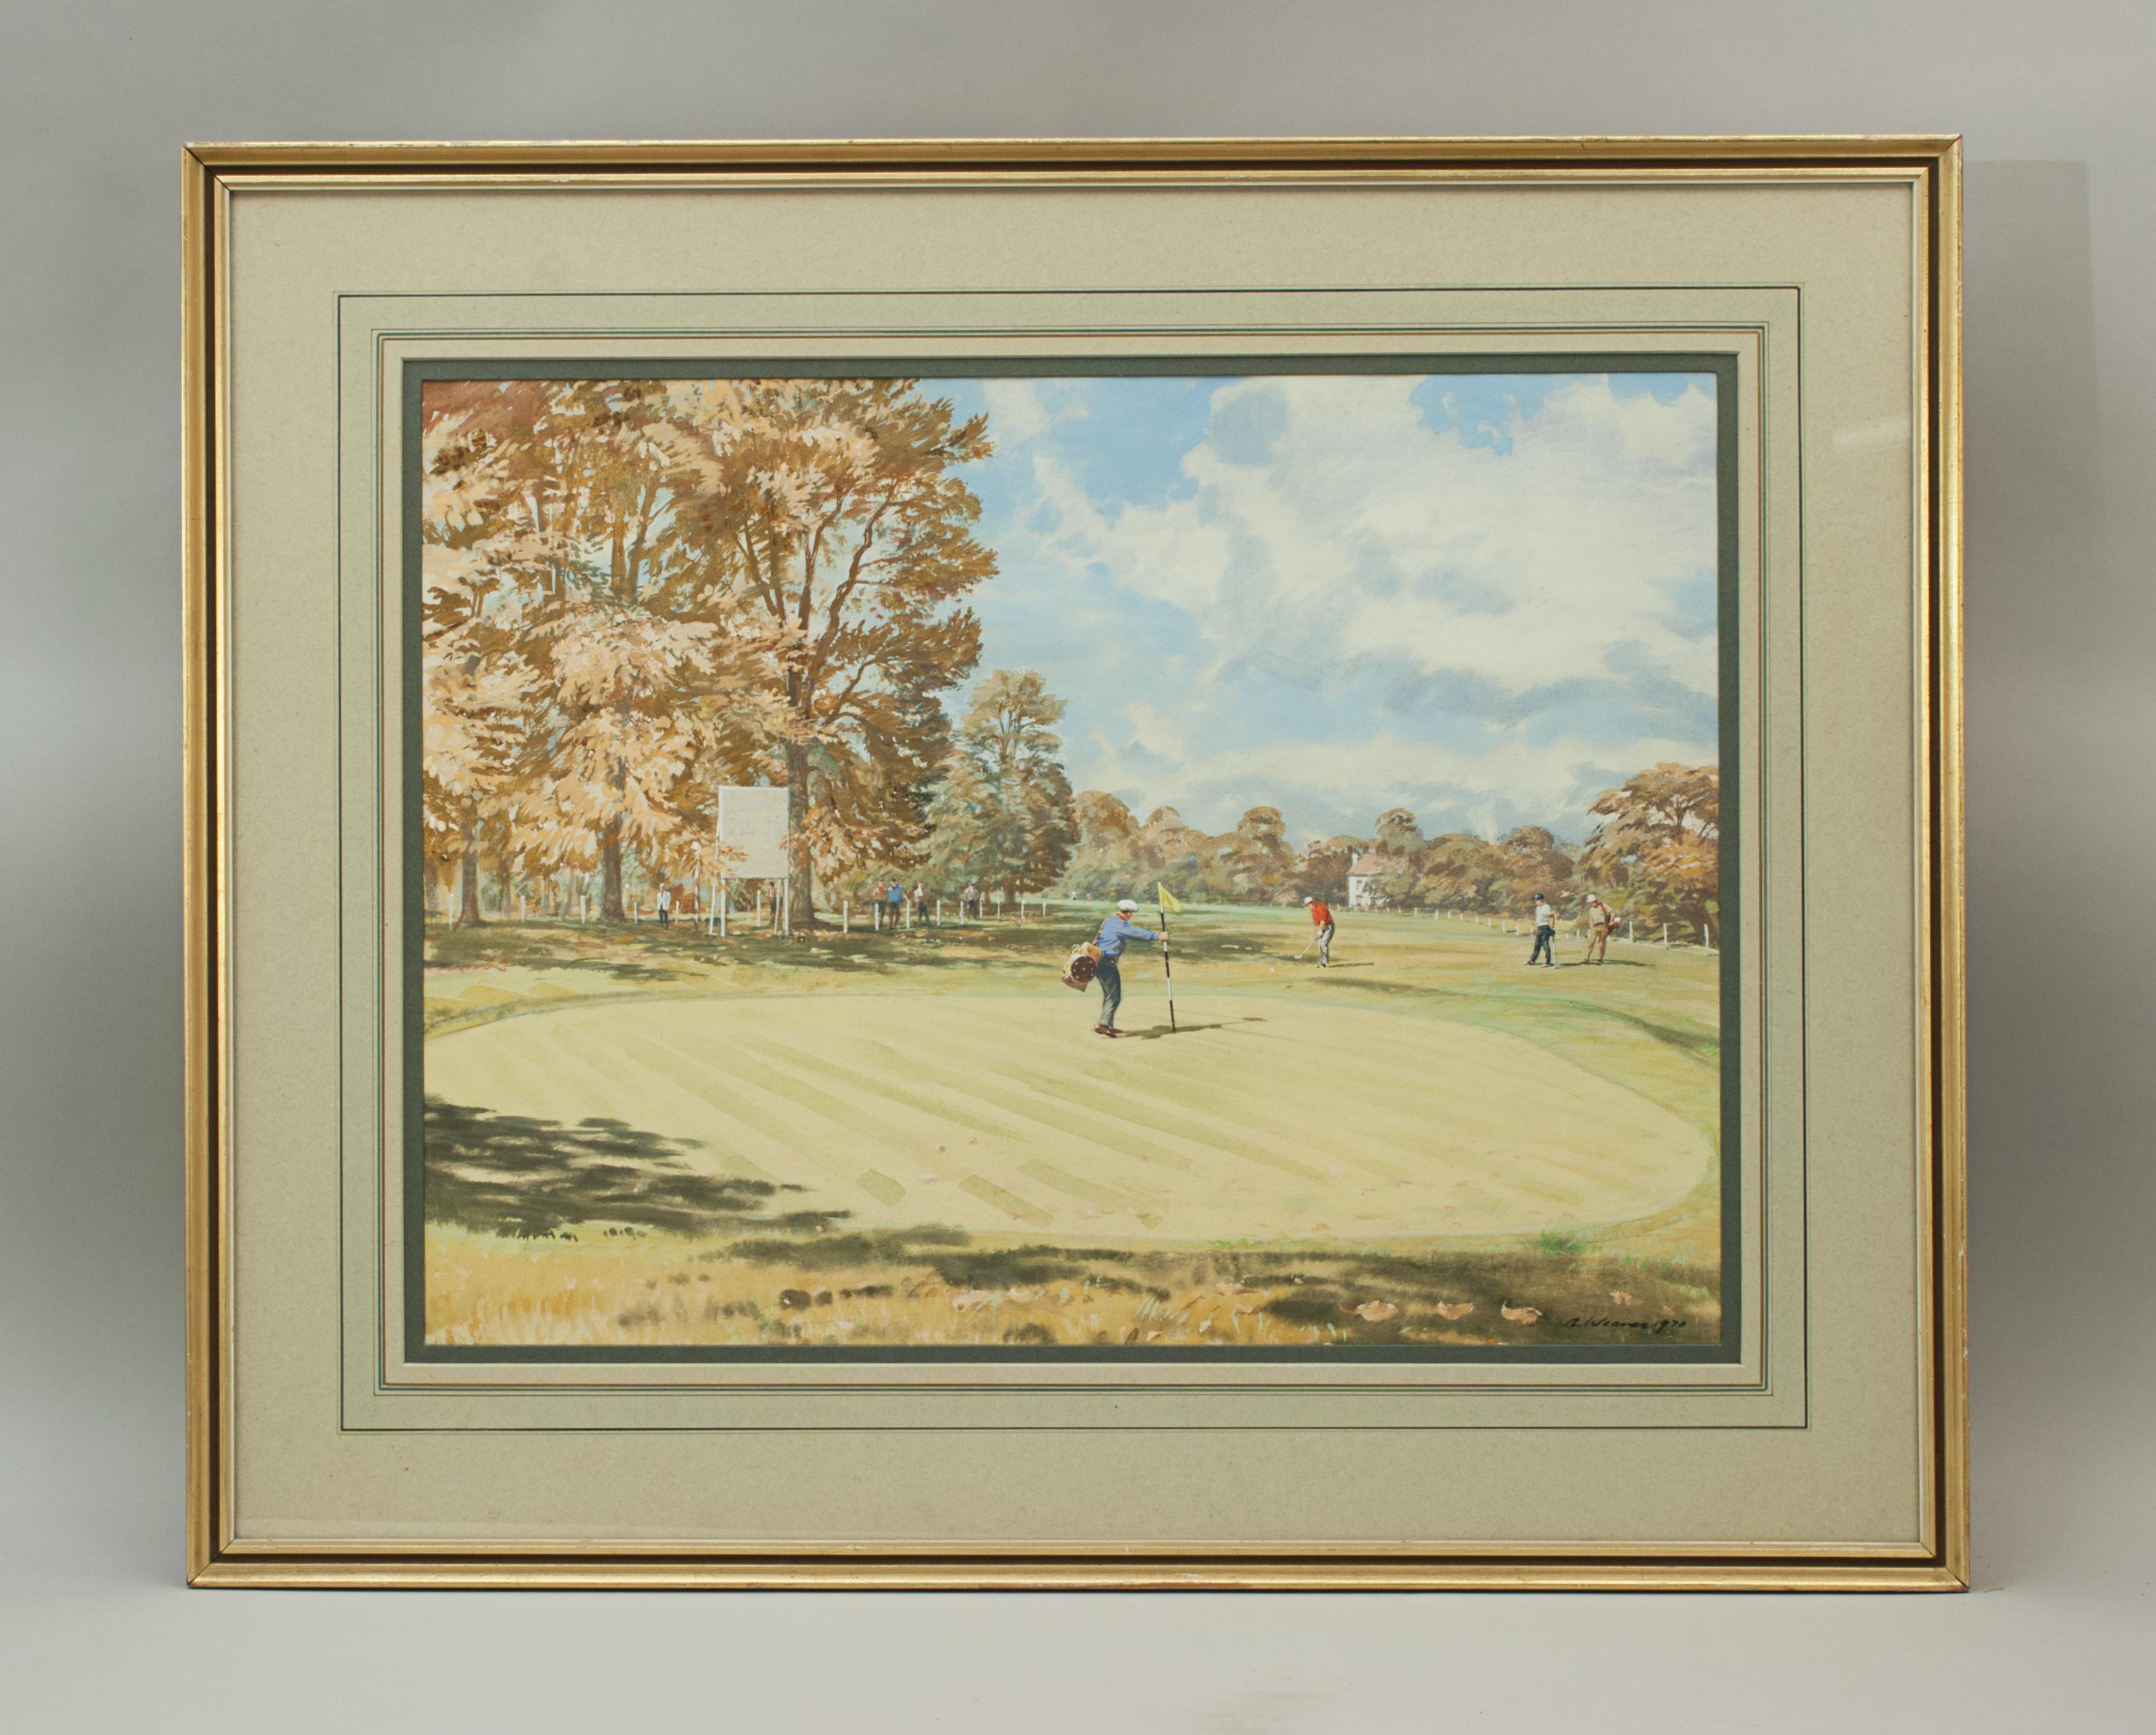 An excellent original golf watercolour and gouache of the 18th green at Wentworth by Arthur Weaver. The picture depicting a golfer chipping onto the 18th green, the flag being manned by his caddie. His playing partner and caddy are stood to the